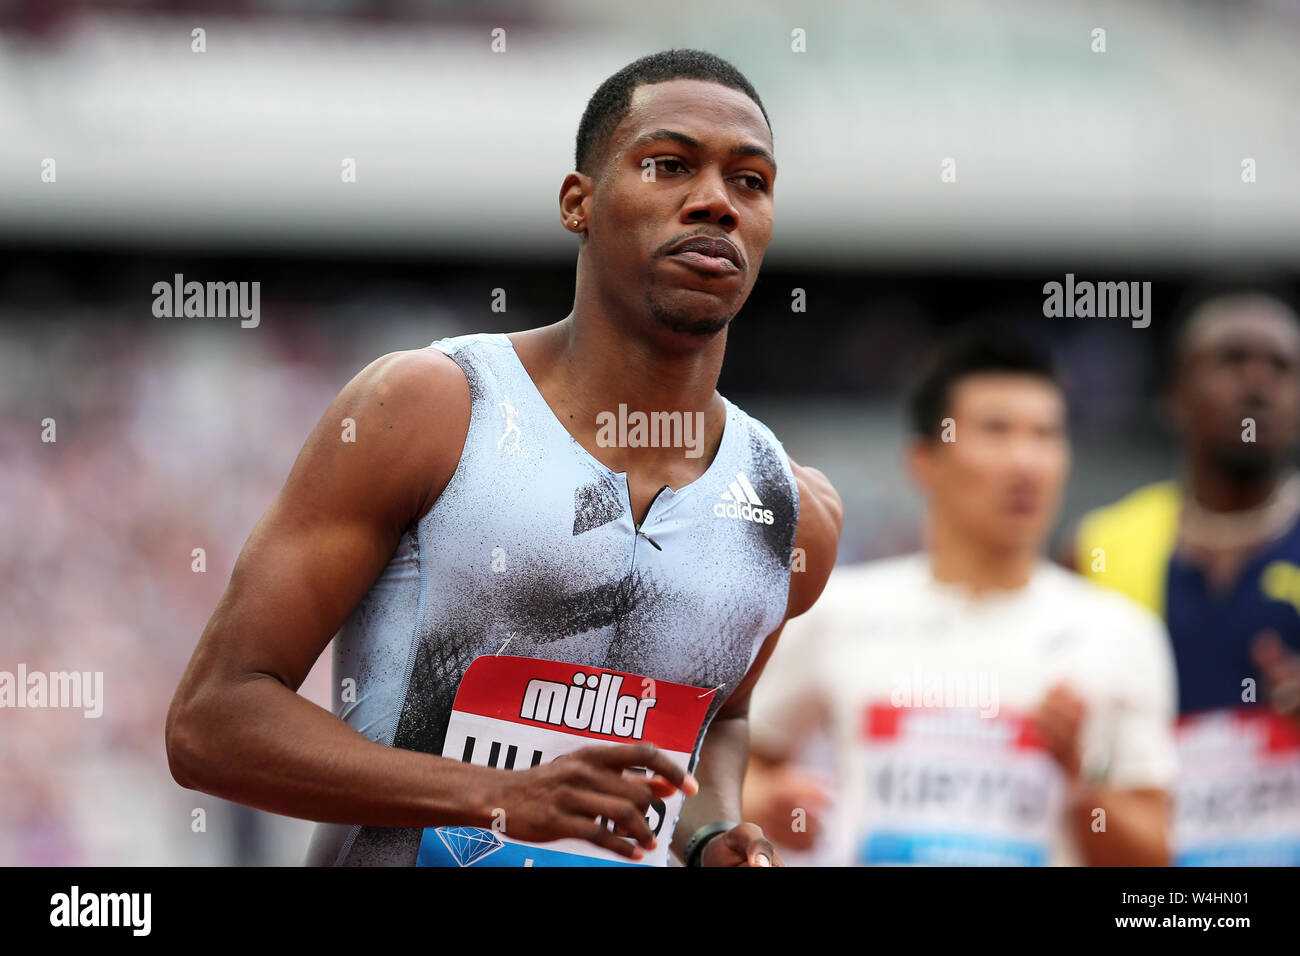 Zharnel HUGHES (Great Britain) crossing the finish line in the Men's 100m Heat 2 at the 2019, IAAF Diamond League, Anniversary Games, Queen Elizabeth Olympic Park, Stratford, London, UK. Stock Photo